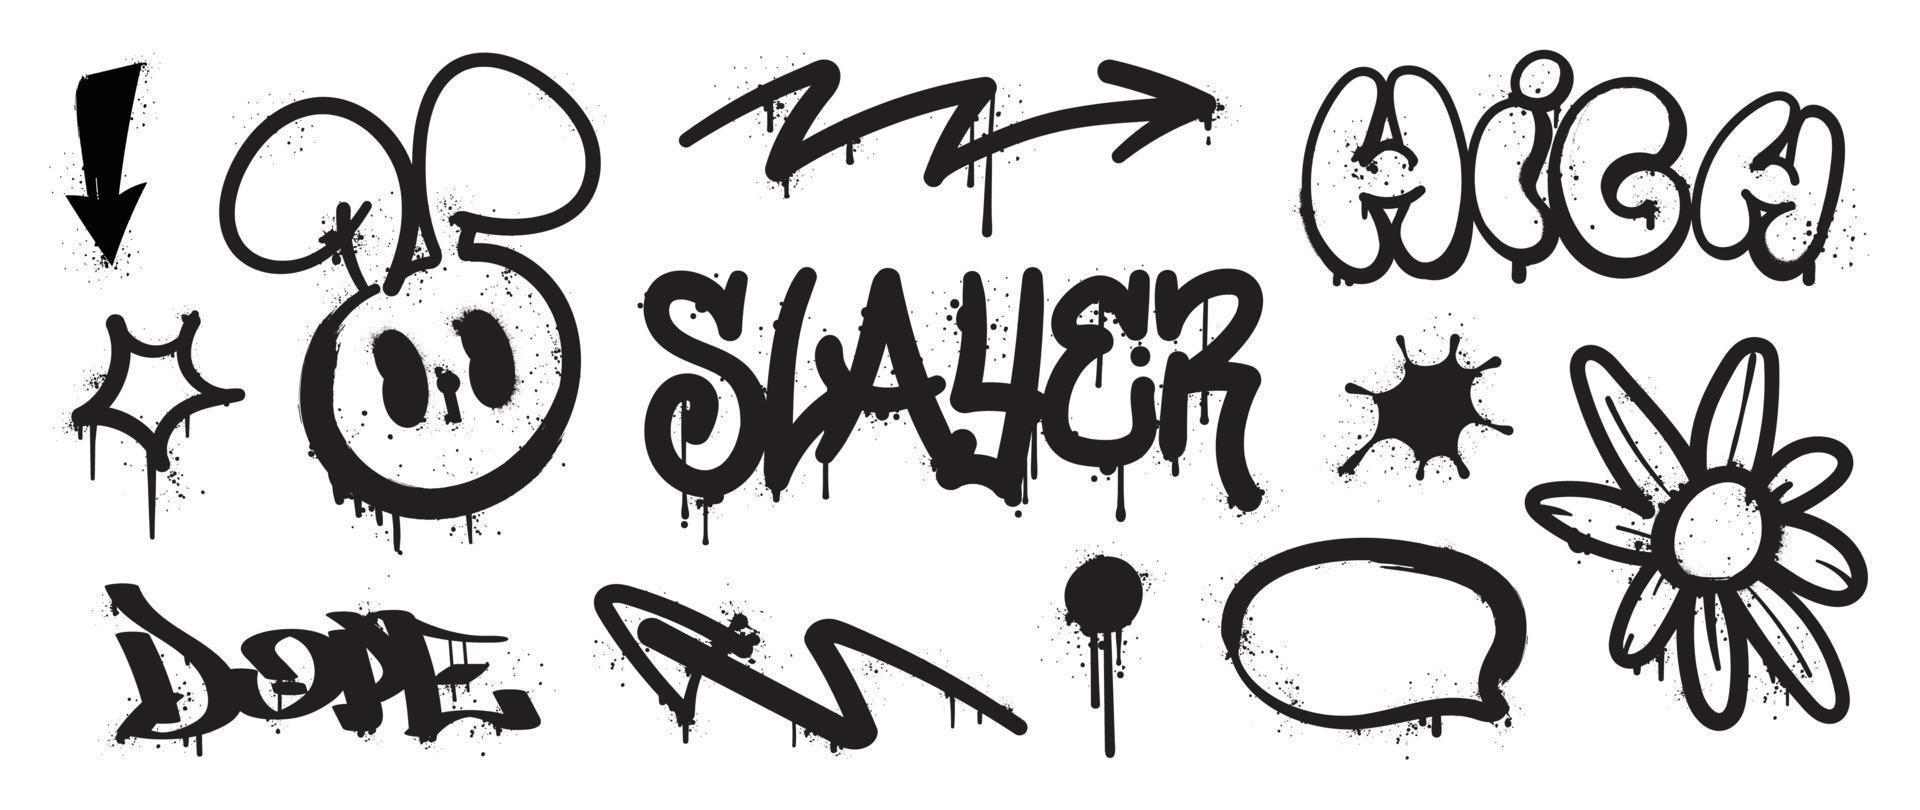 Set of graffiti spray pattern. Collection of black symbols, arrow, rabbit, text, flower and stroke with spray texture. Elements on white background for banner, decoration, street art and ads. vector